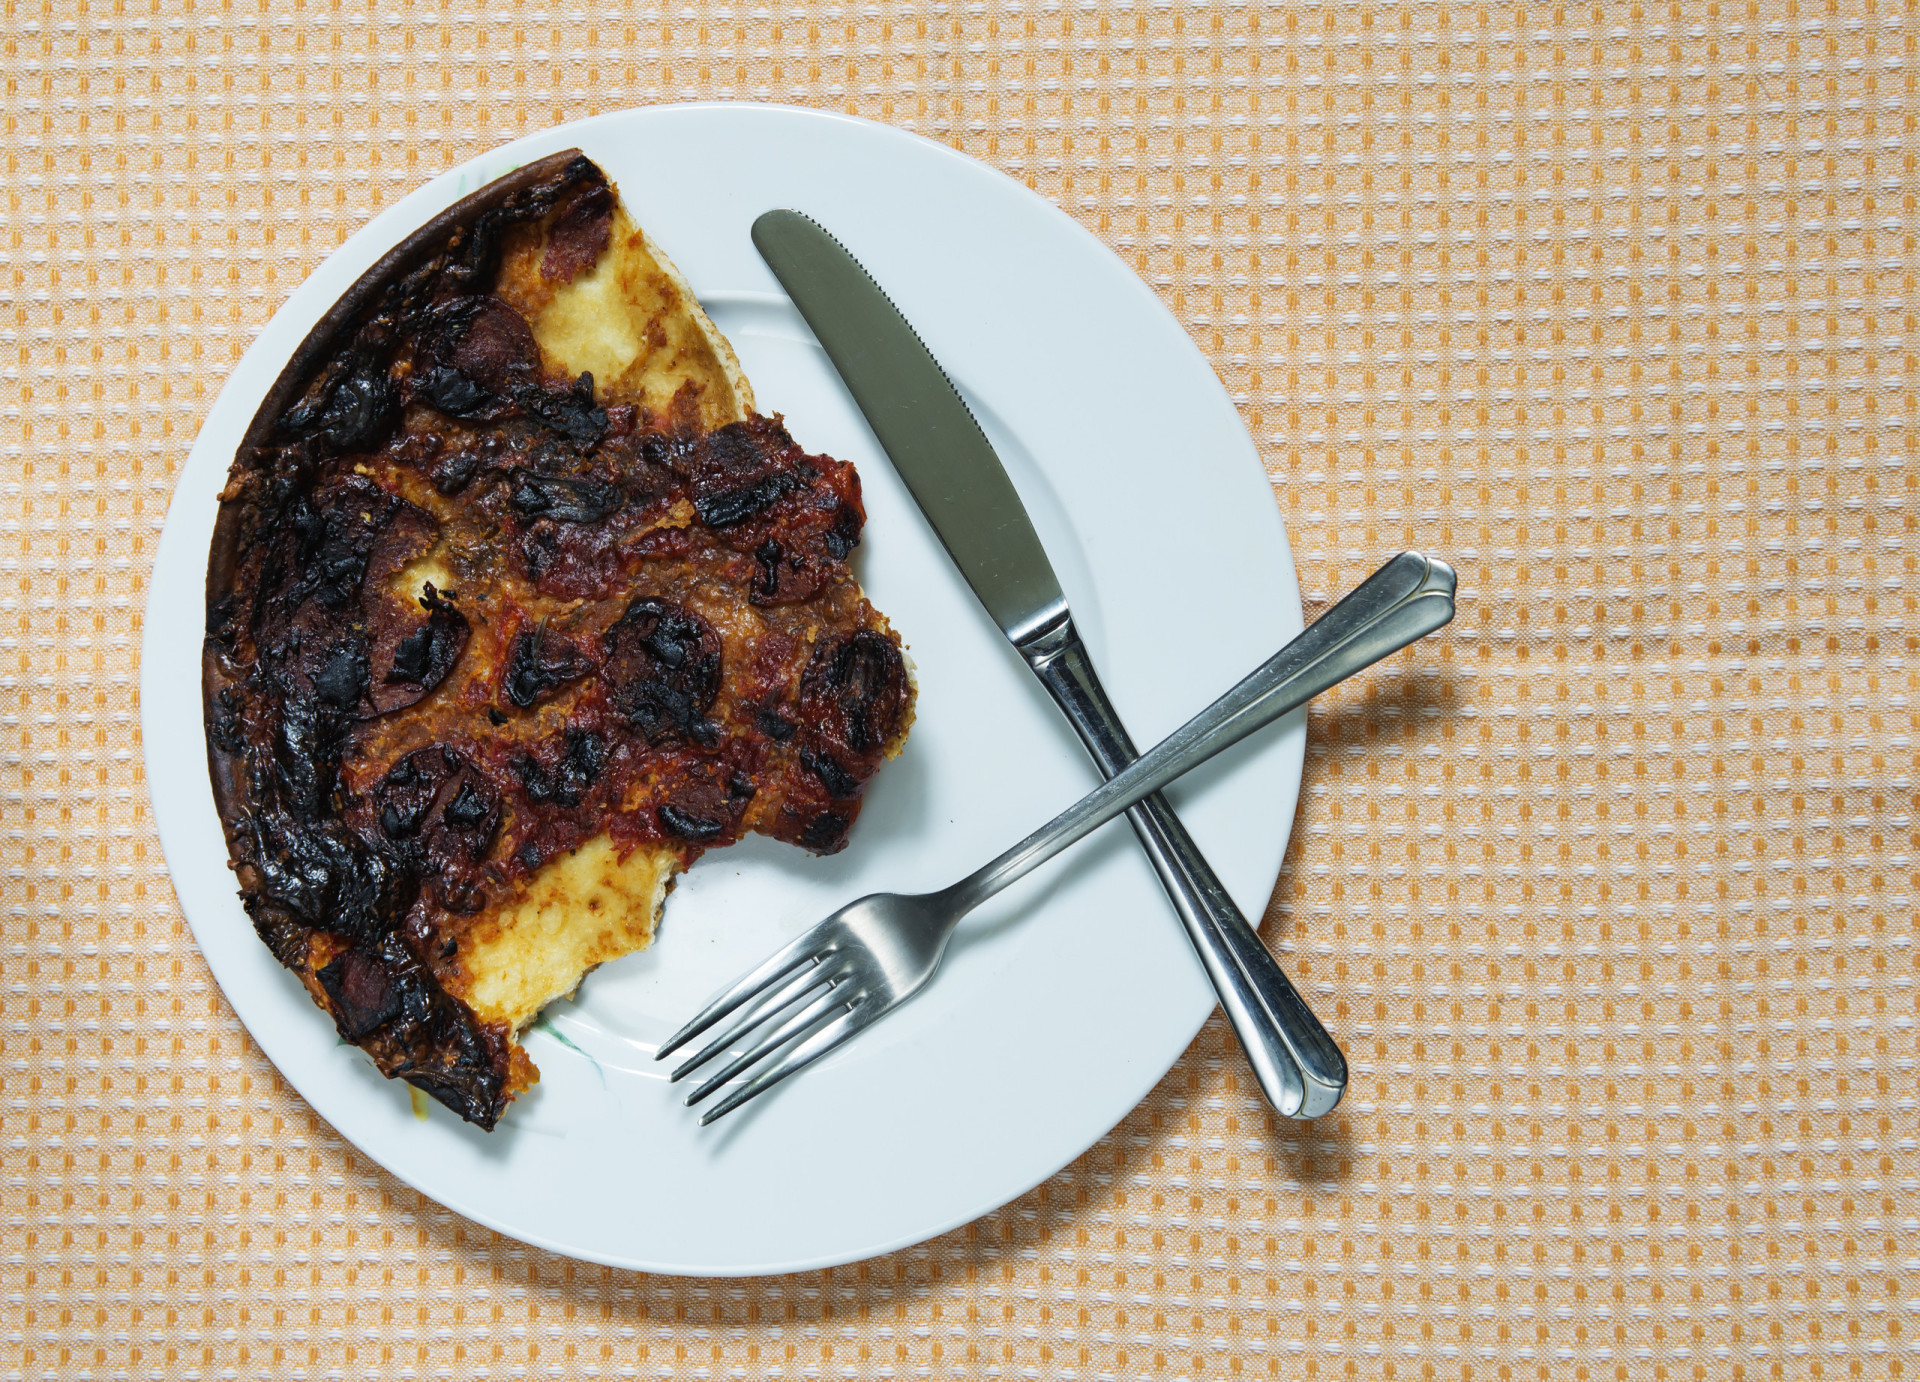 Is Burnt Food Actually Bad For Us